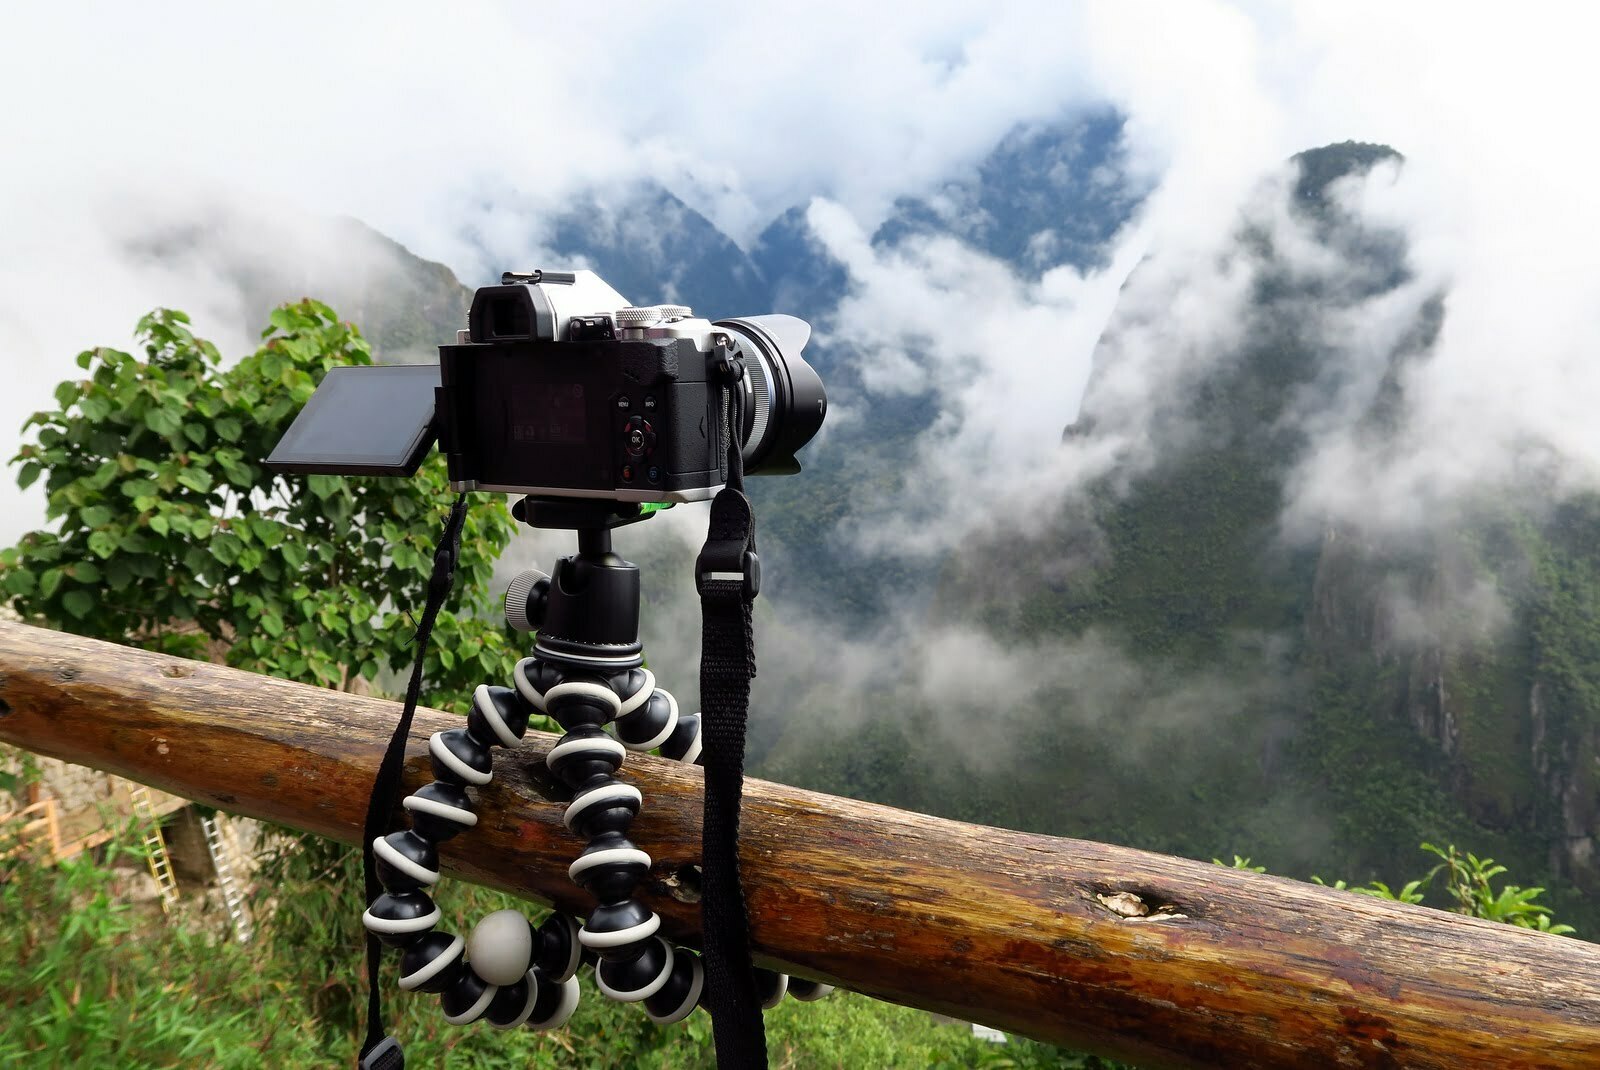 Minimum Volatility Factor Strategies | Low Volatility as the Best Equity Factor with Gorilla pod holding a camera while taking photos of Machu Picchu Peru